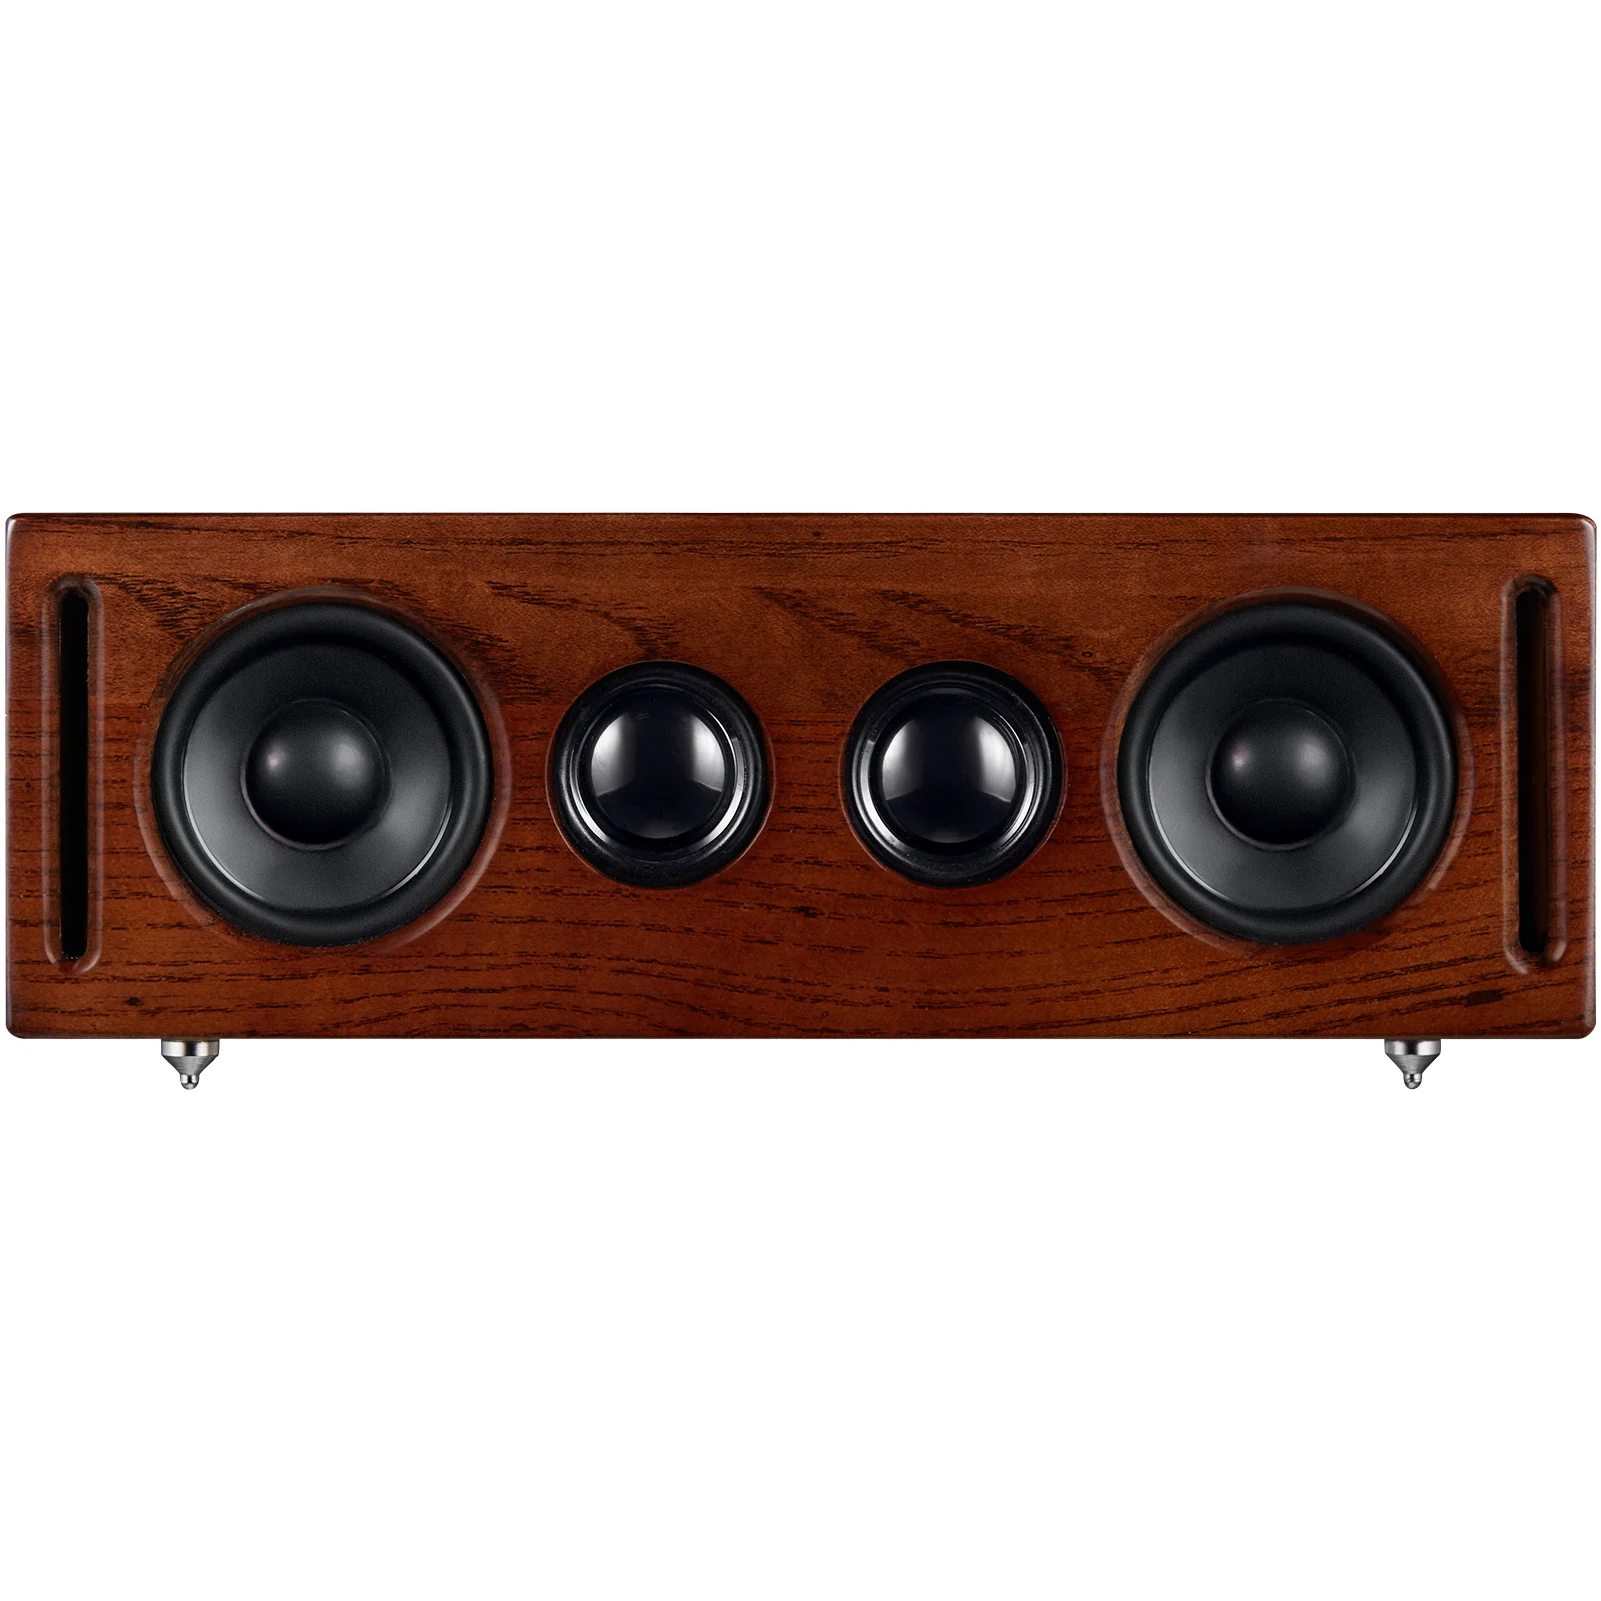 

High quality 40W Surround Sound Home Theater System Wooden Bluetooth Speaker